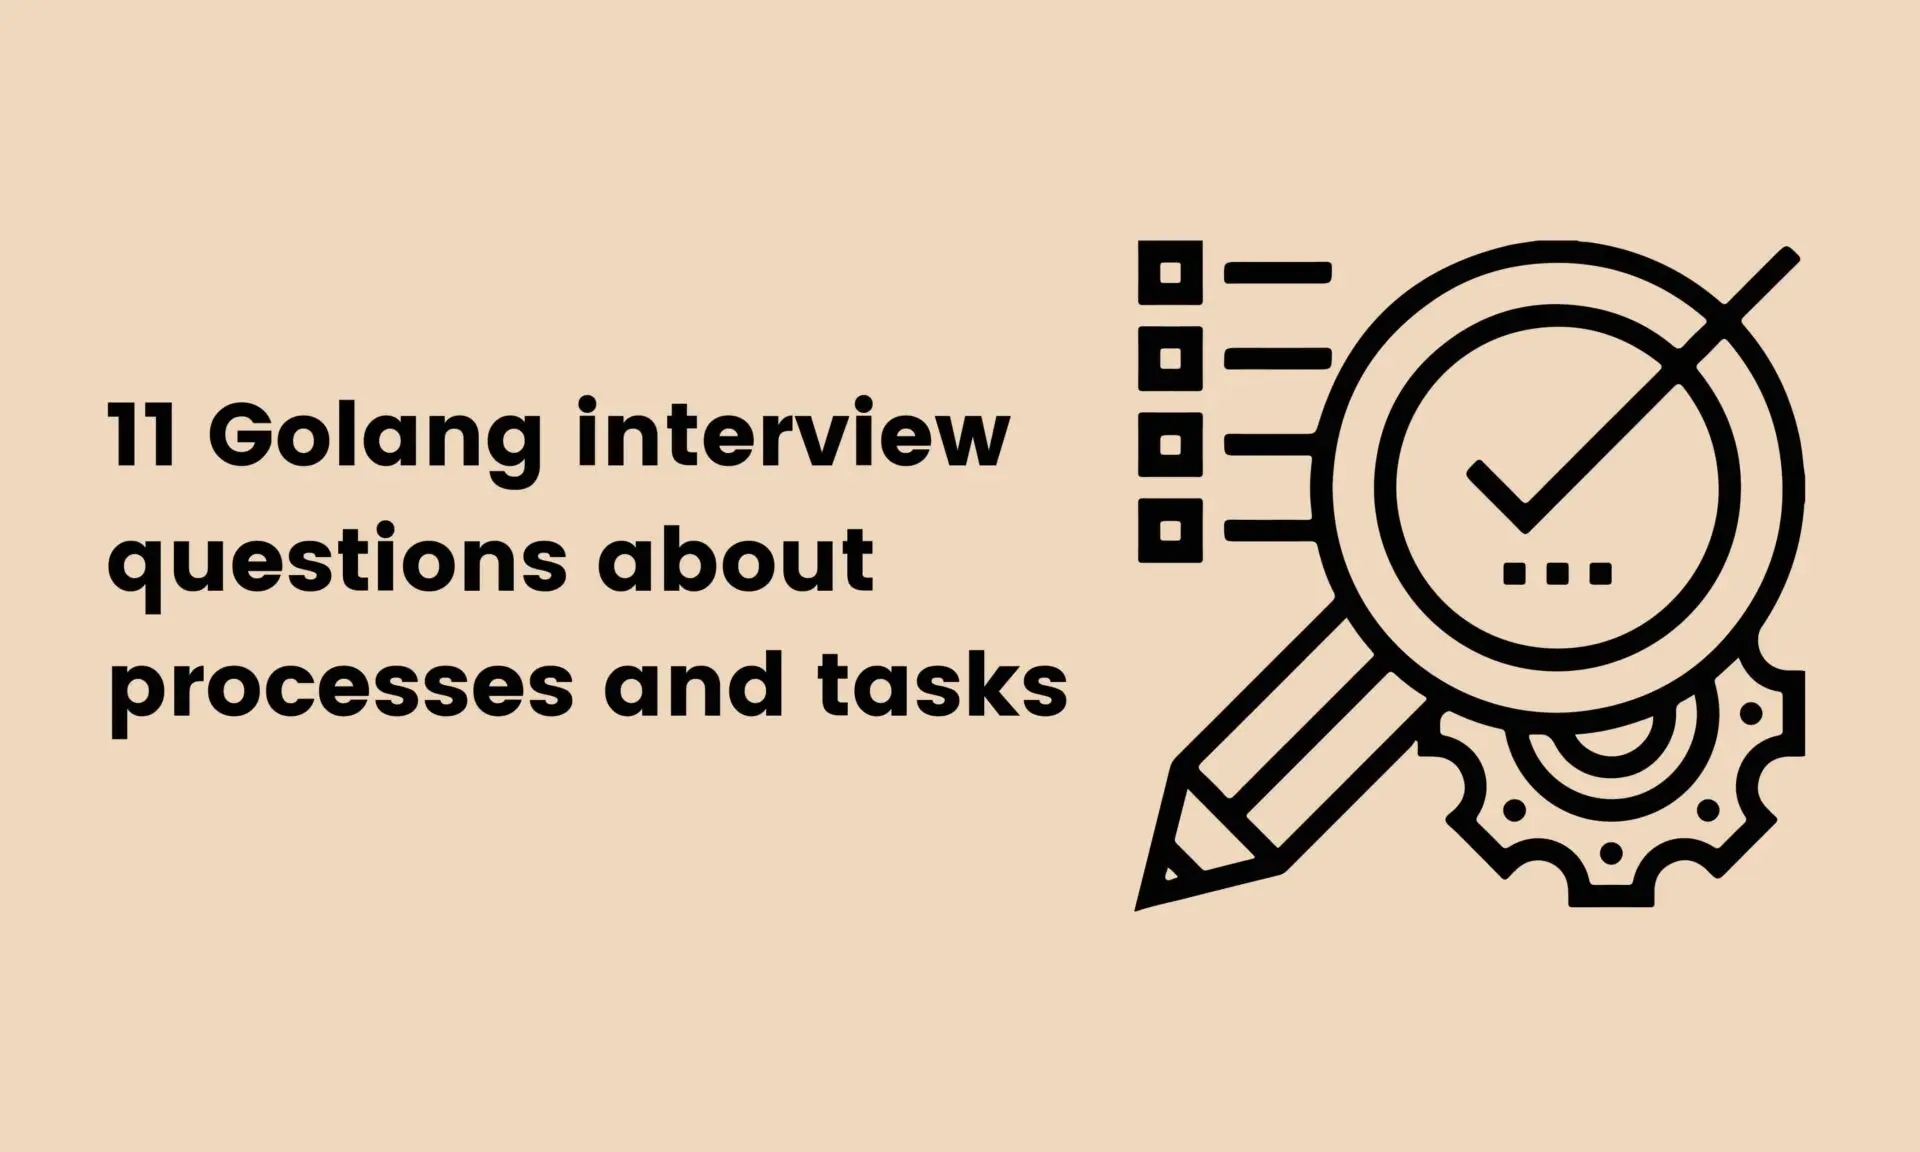 11 Golang interview questions about processes and tasks